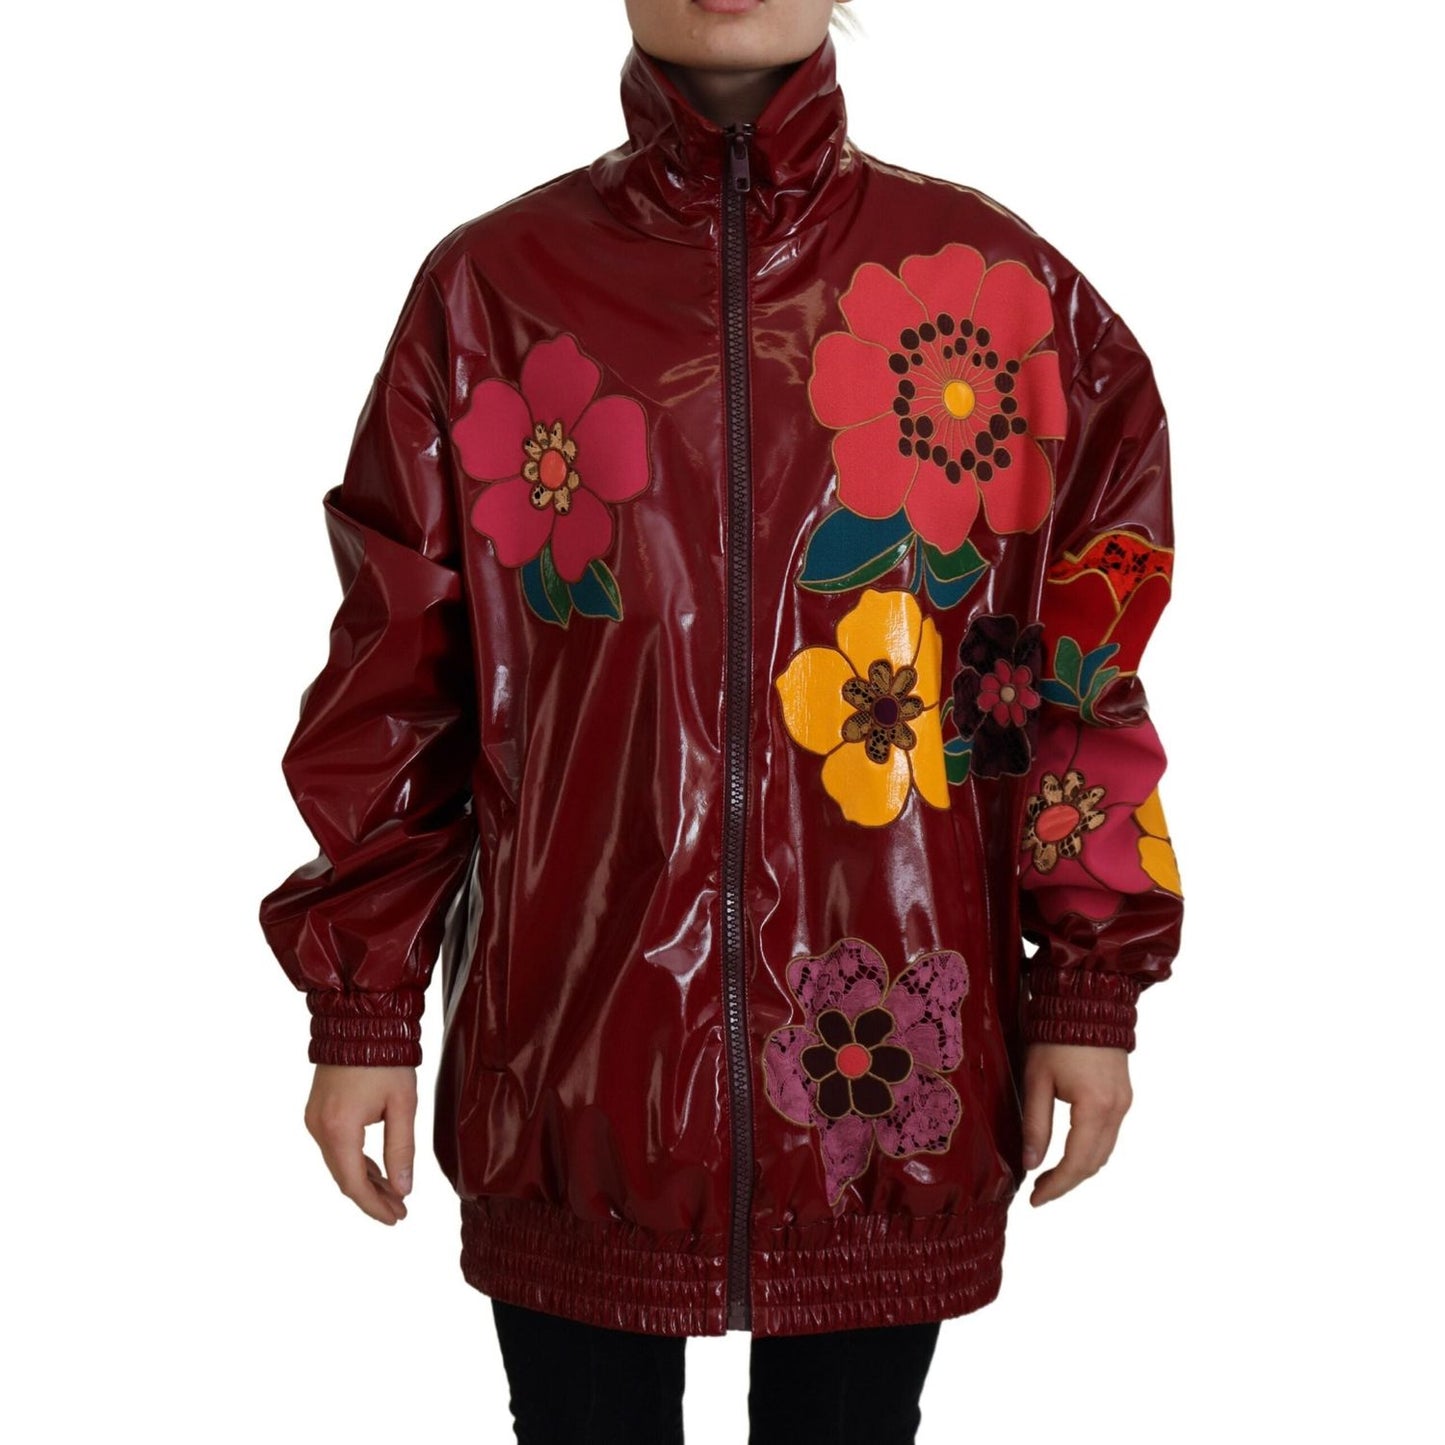 Dolce & Gabbana Maroon Floral Luxe Jacket maroon-floral-full-zip-polyester-women-jacket